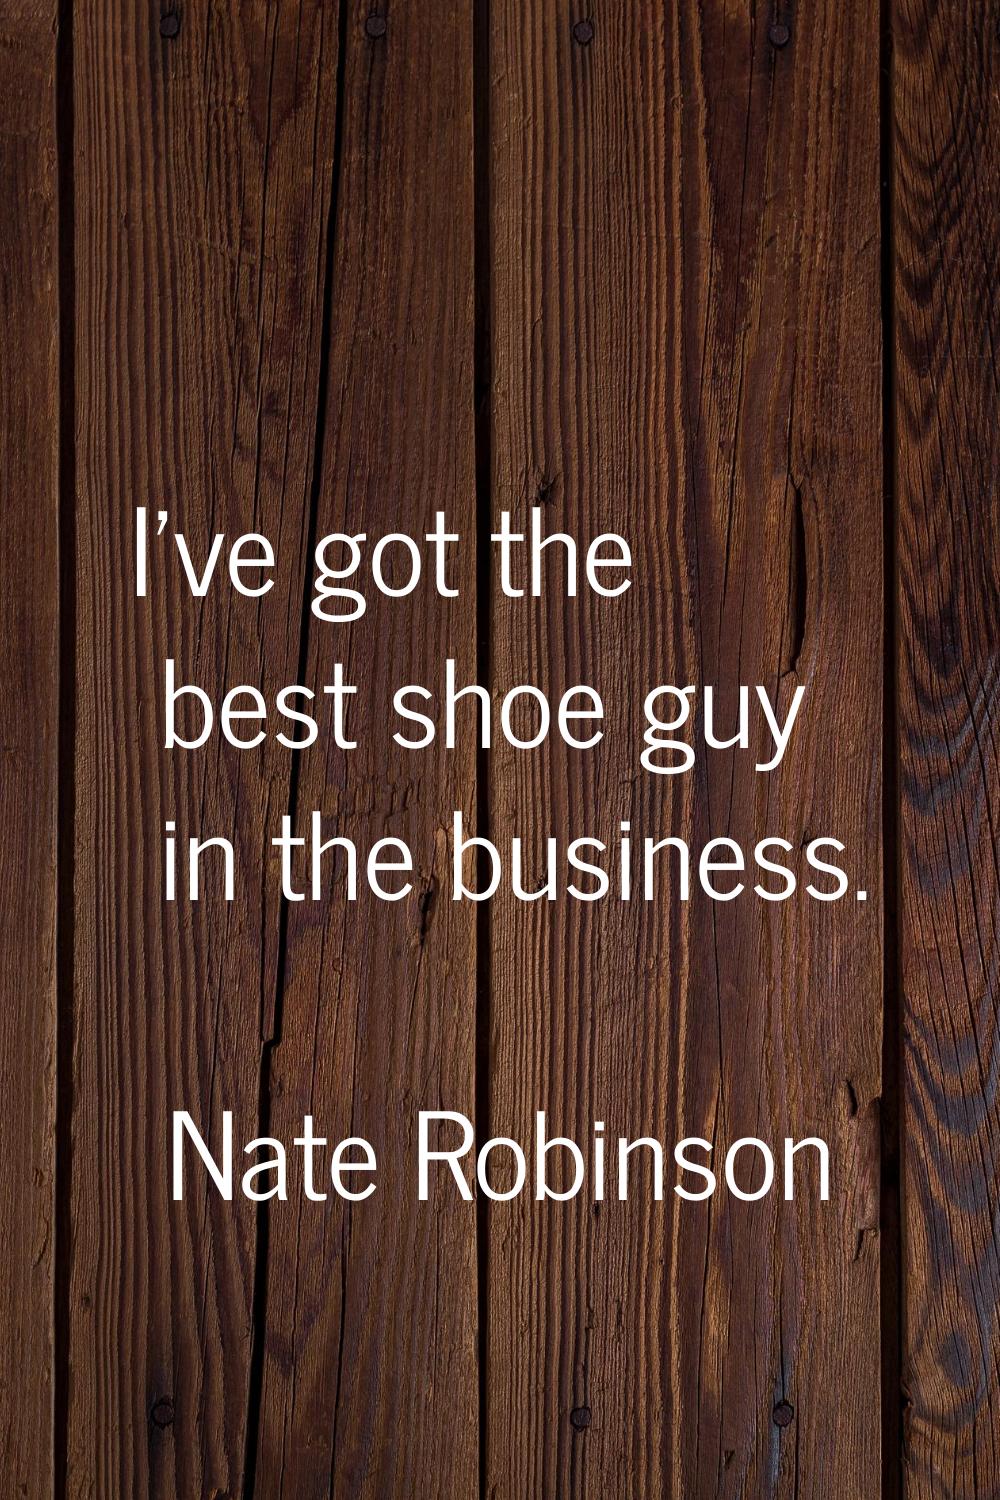 I've got the best shoe guy in the business.